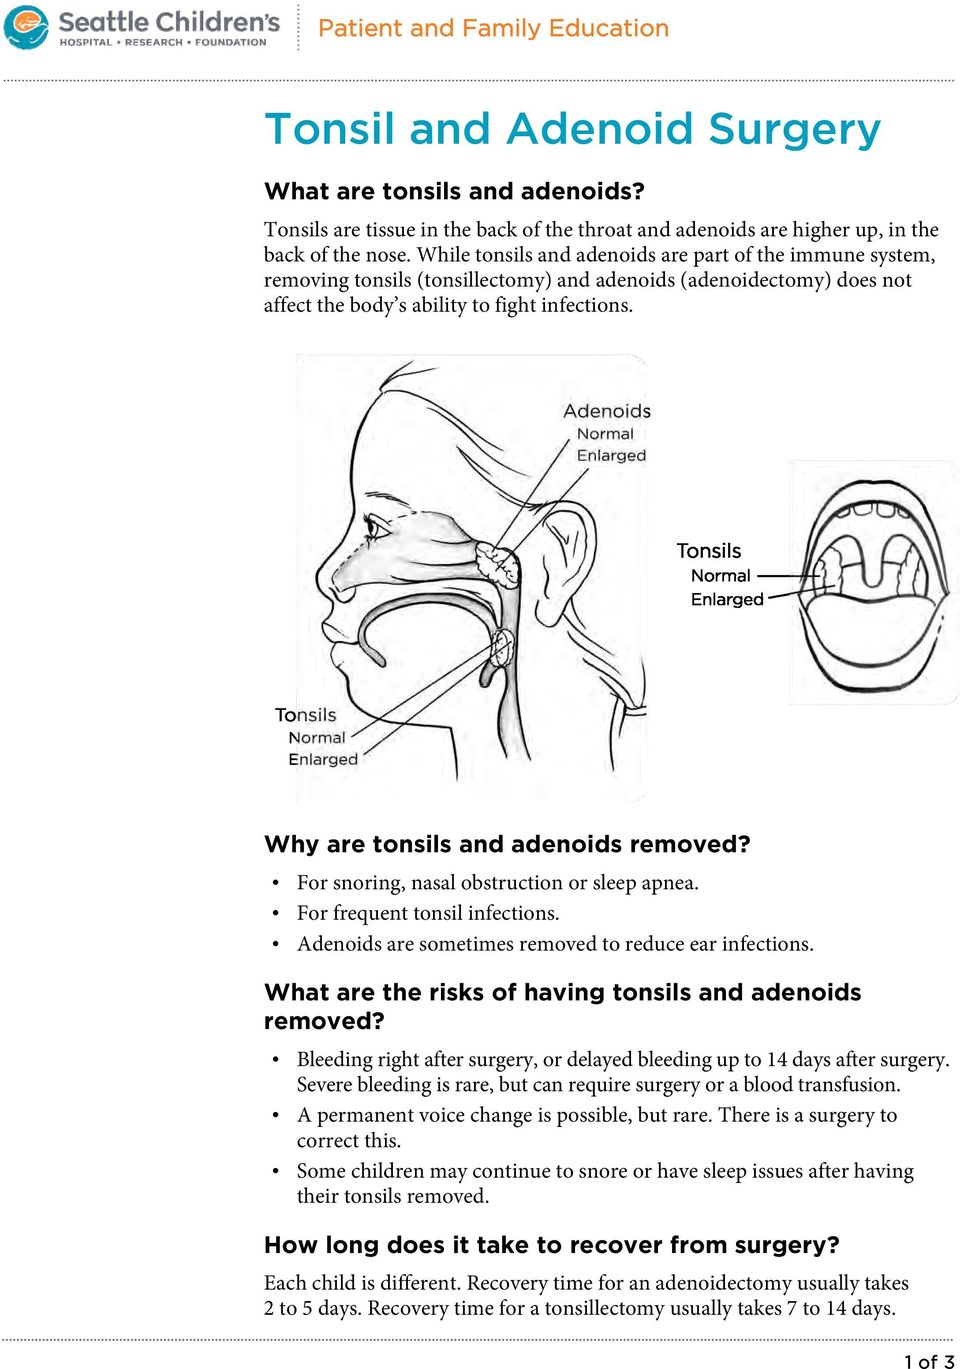 Why are tonsils and adenoids removed? For snoring, nasal obstruction or sleep apnea. For frequent tonsil infections. Adenoids are sometimes removed to reduce ear infections.